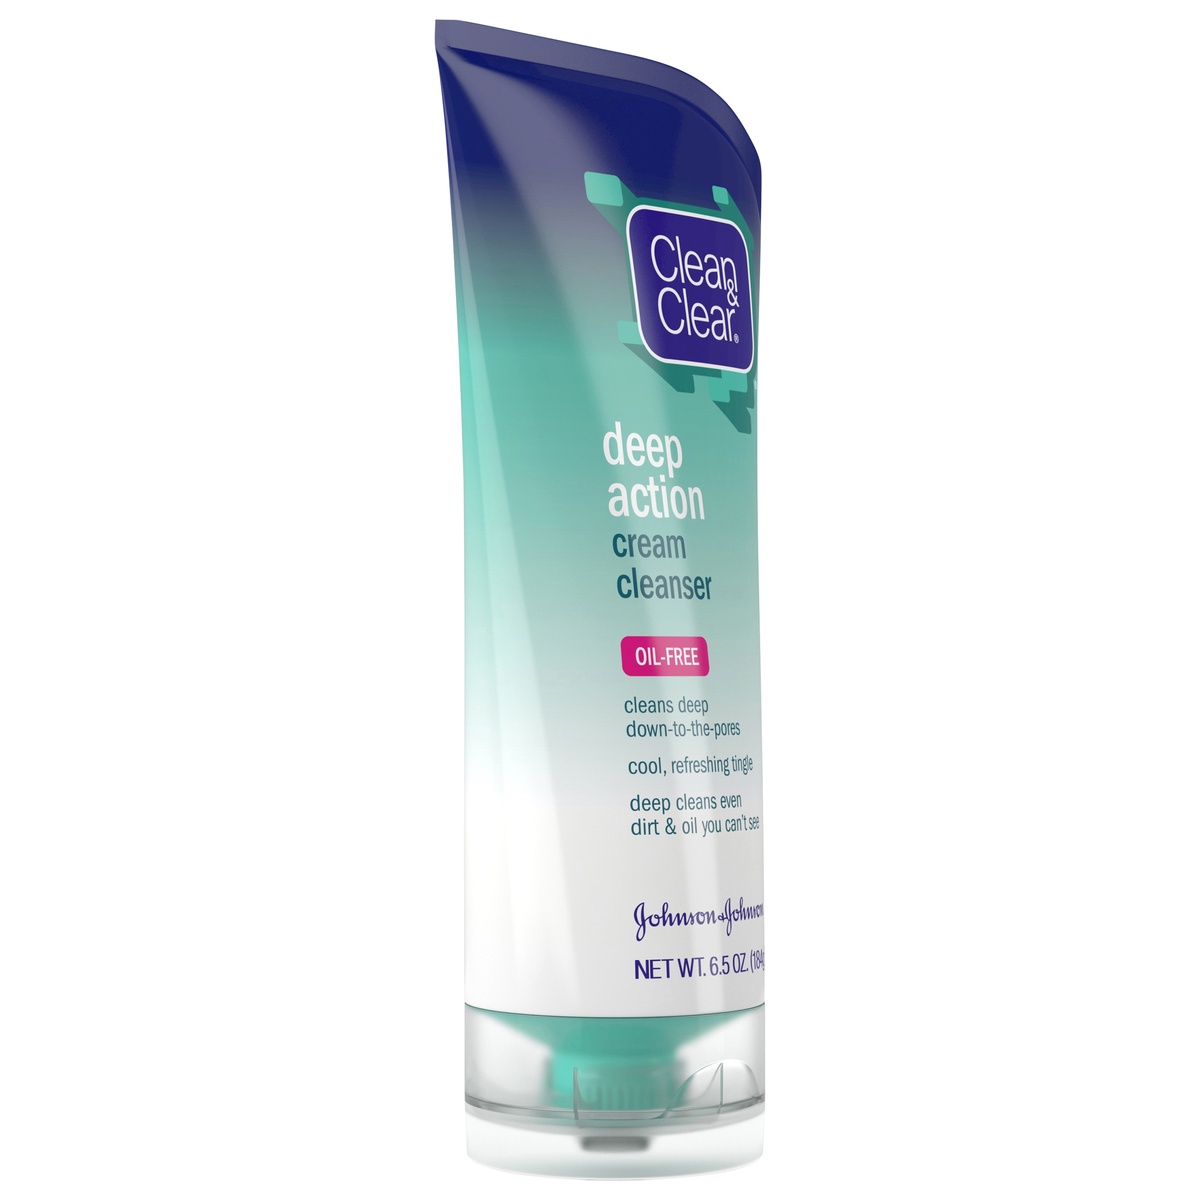 slide 2 of 7, Clean & Clear Oil-Free Deep Action Cream Facial Cleanser - 6.5oz, 6.5 oz